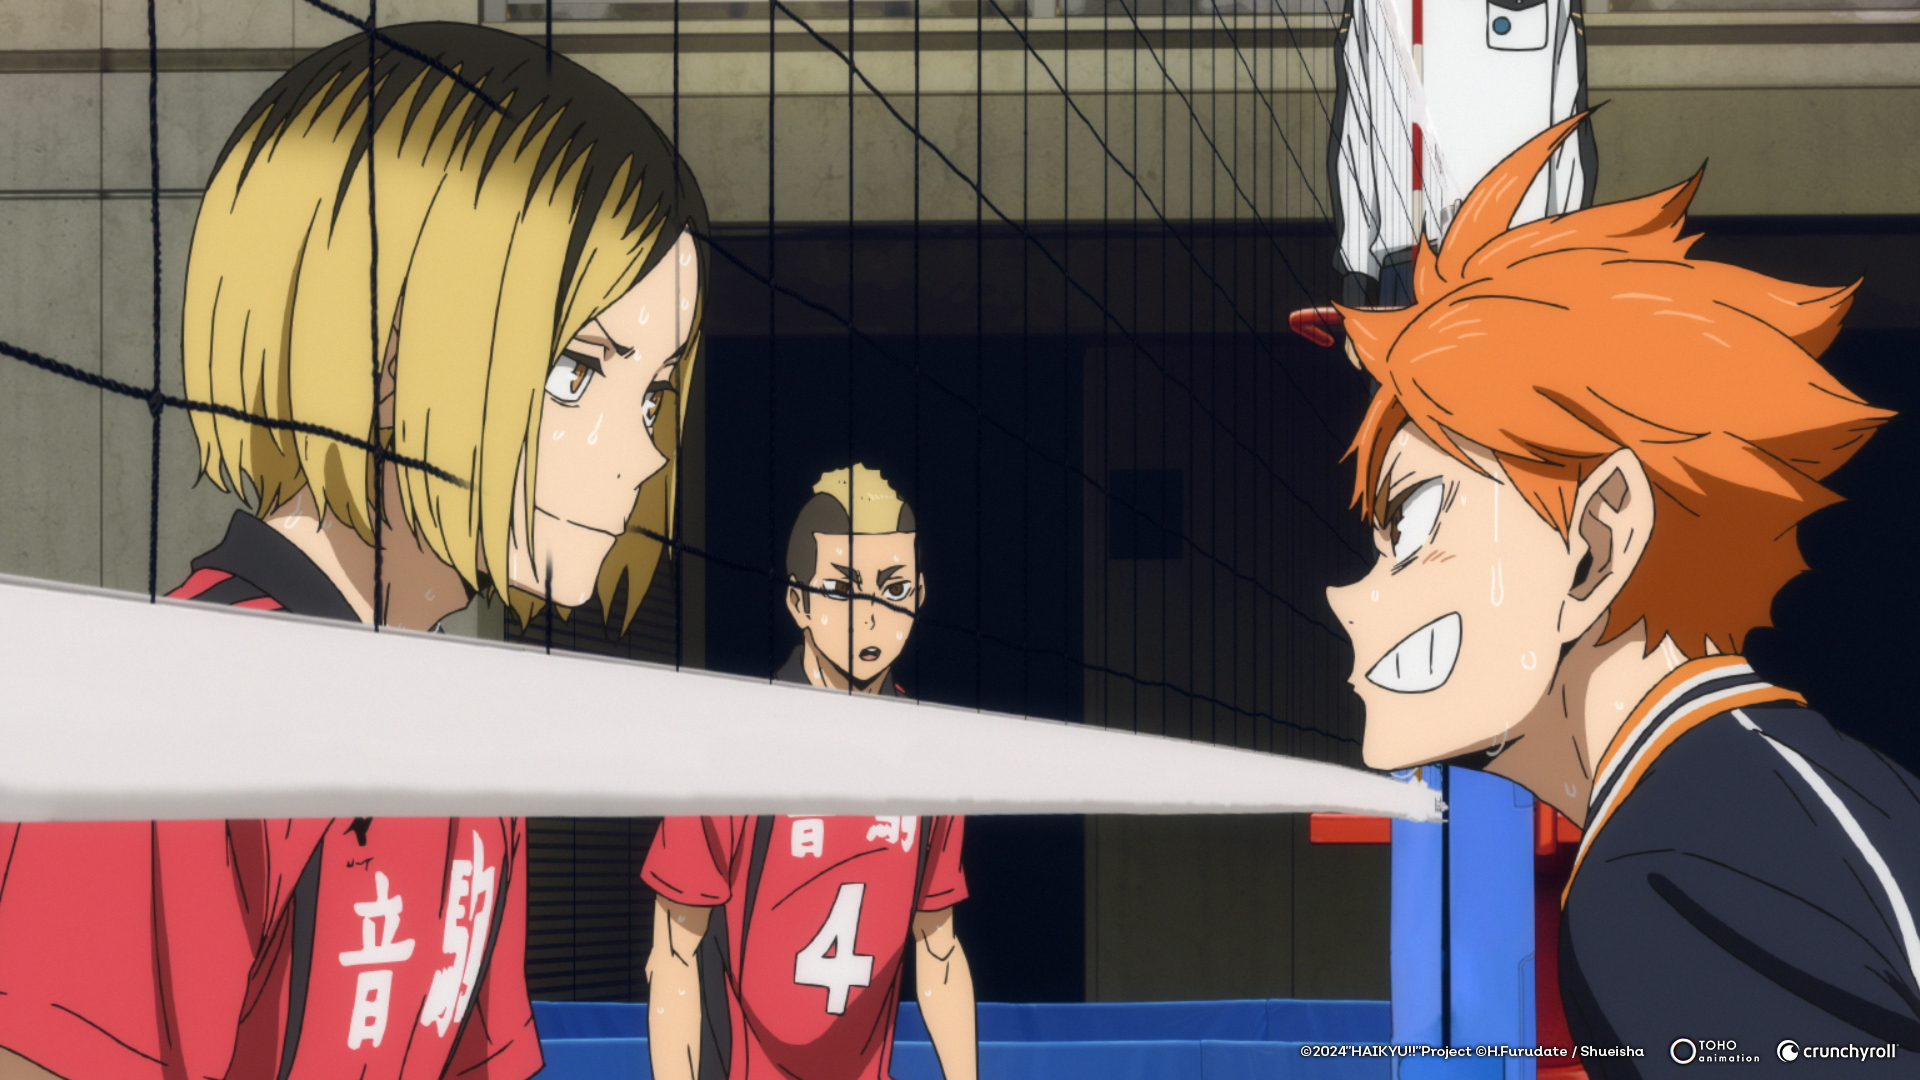 A blond boy in a red uniform and an orange-haired boy in a black uniform face off through a volleyball net in Haikyu!! The Dumpster Battle